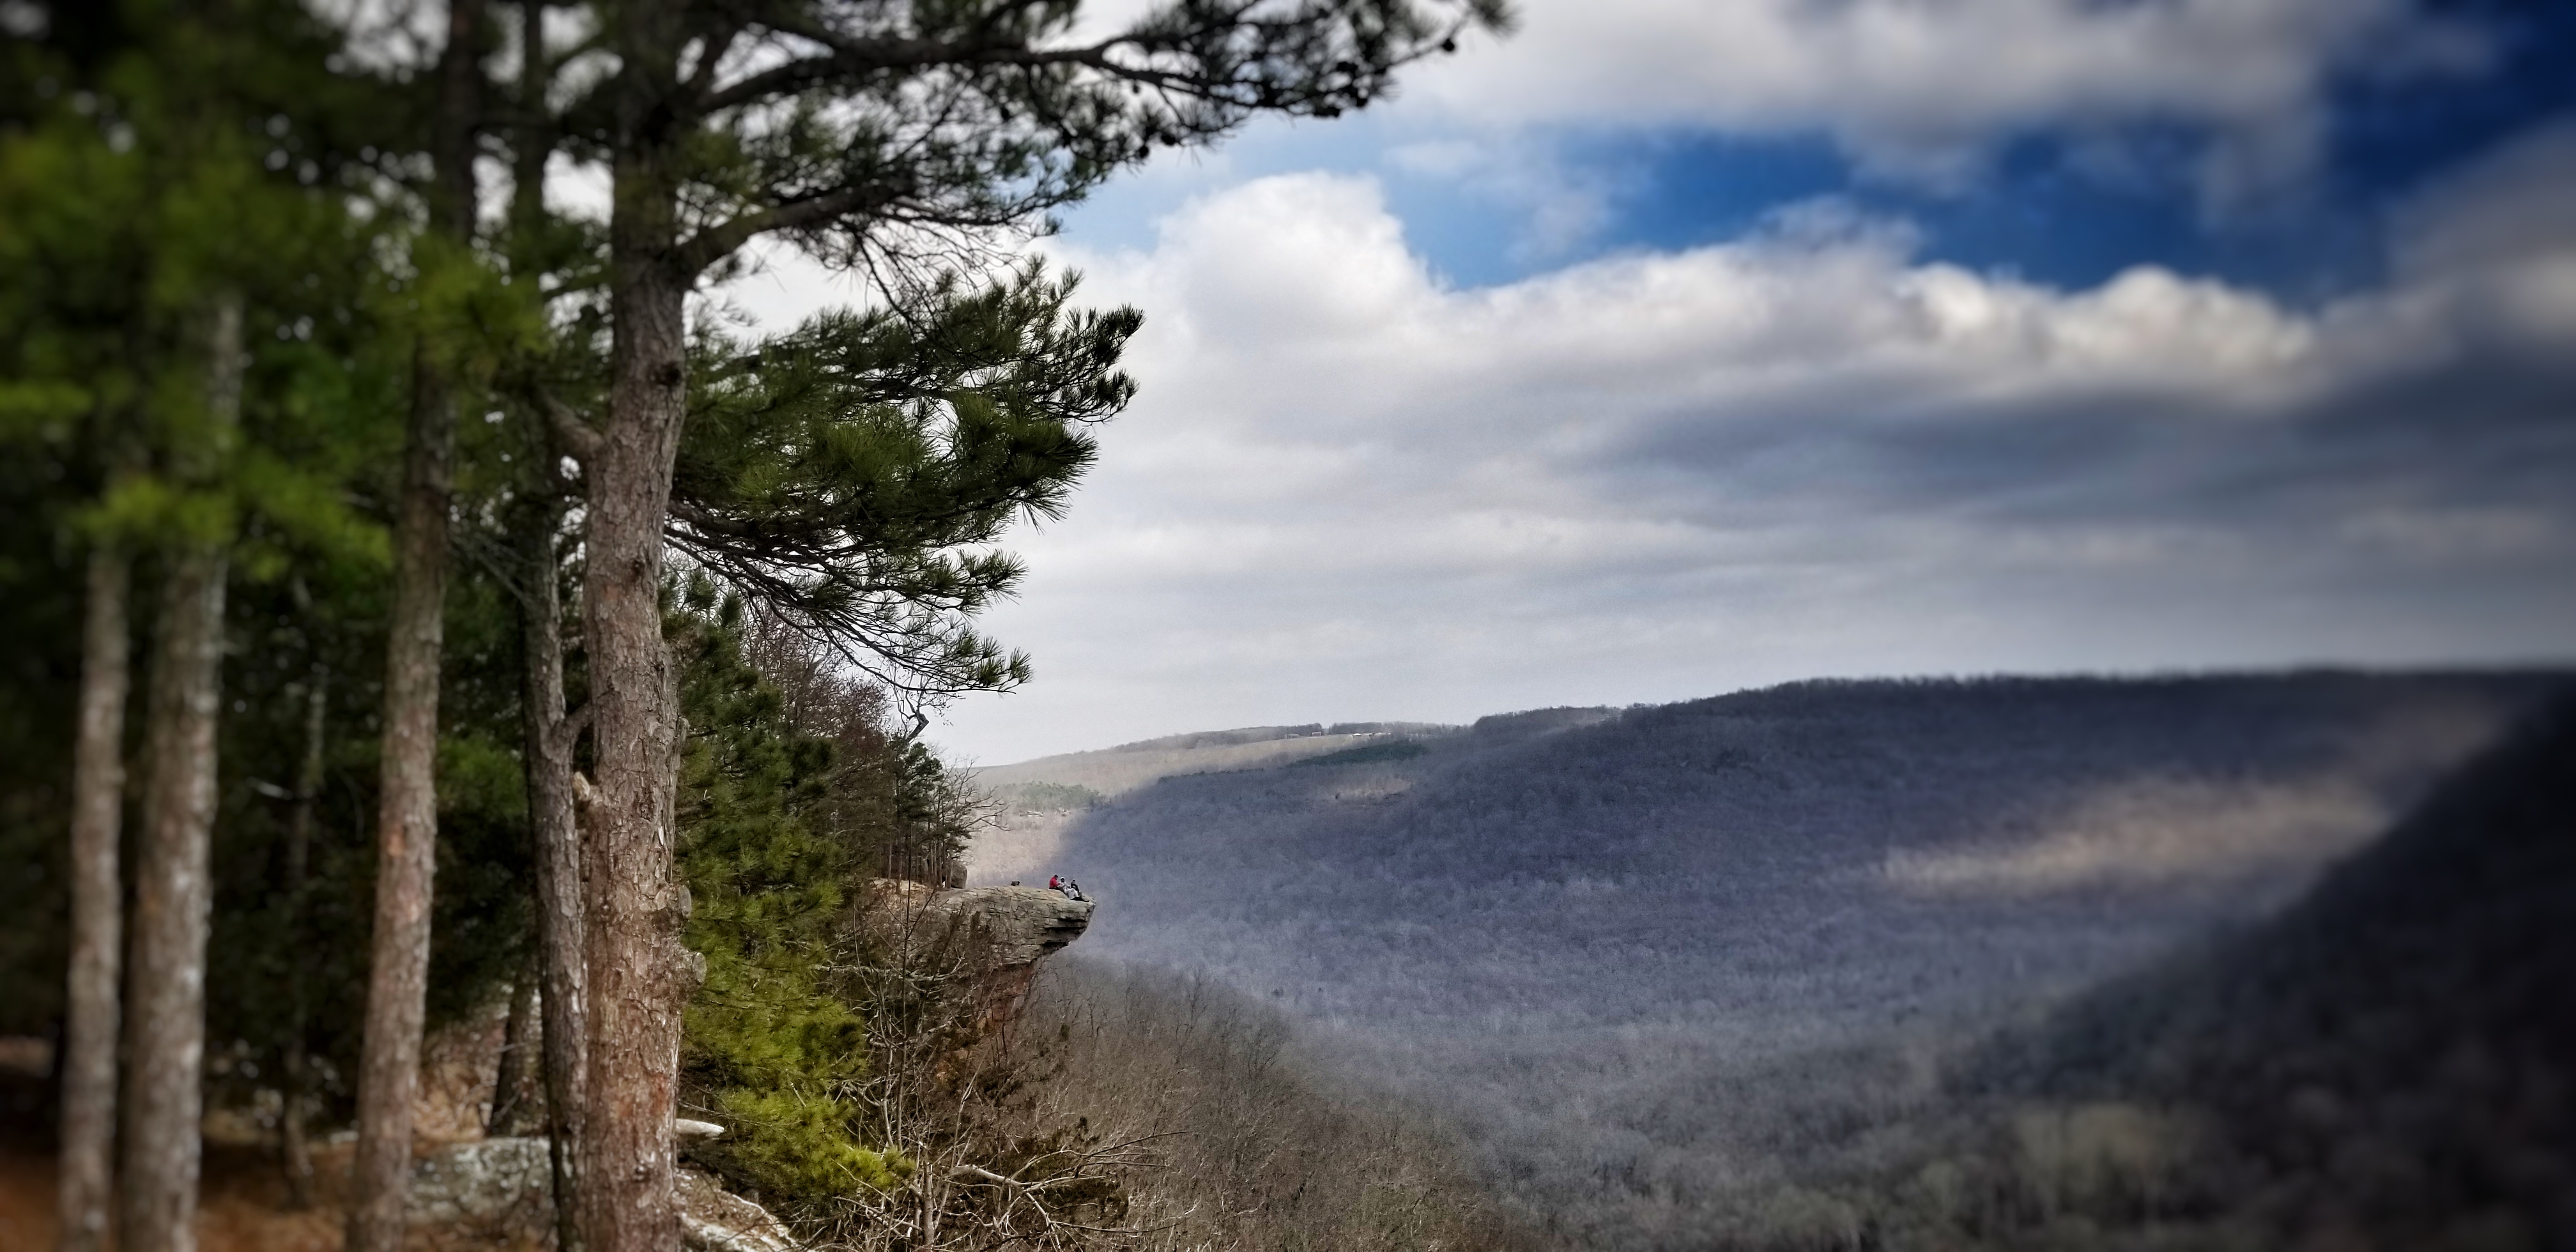 Whitaker Point and Lost Valley [VIDEO]